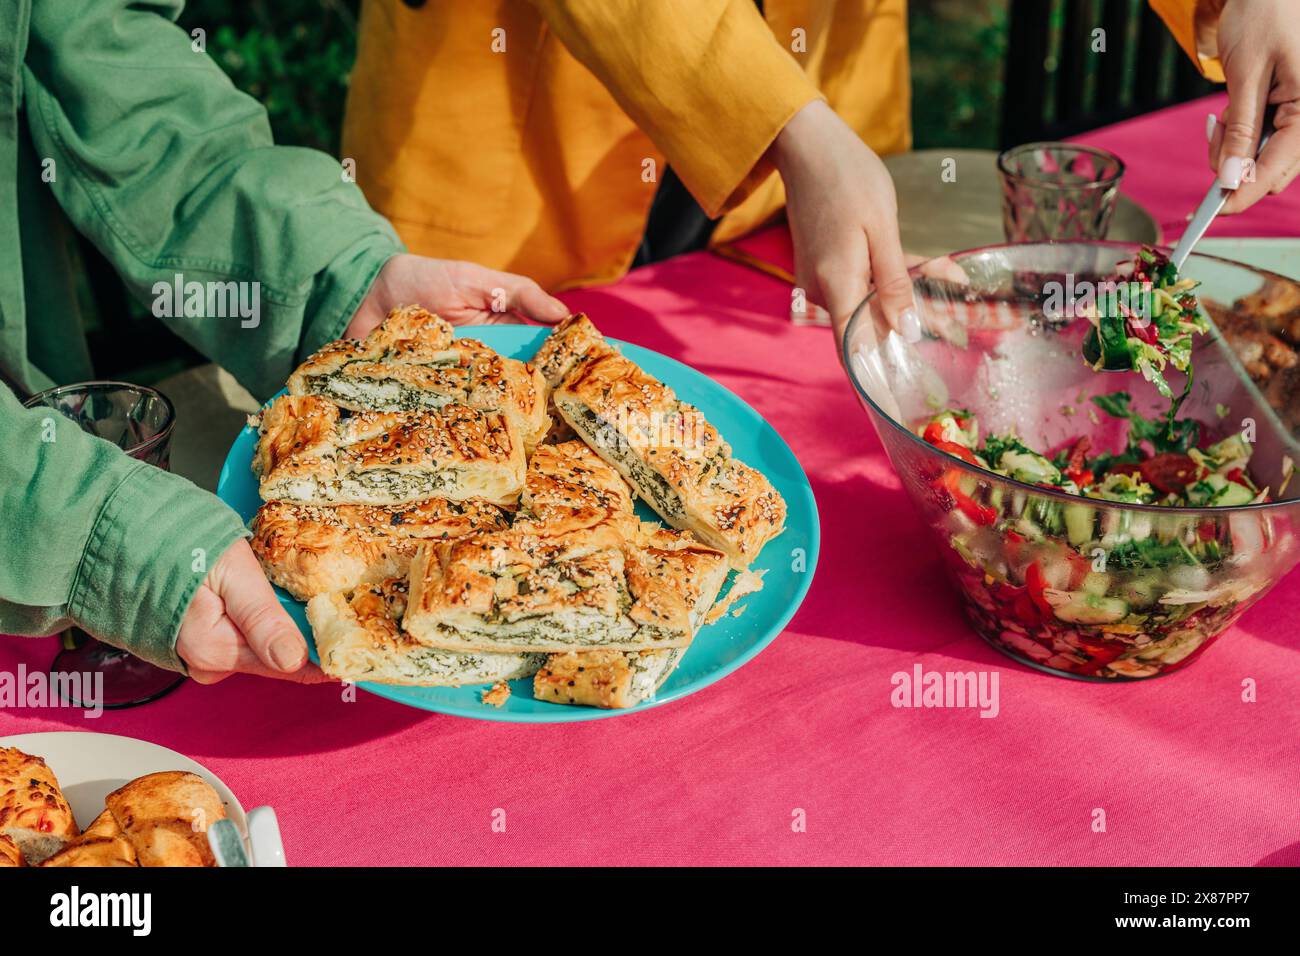 Hands of women serving green salad and cheese stuffed bread at dining table Stock Photo